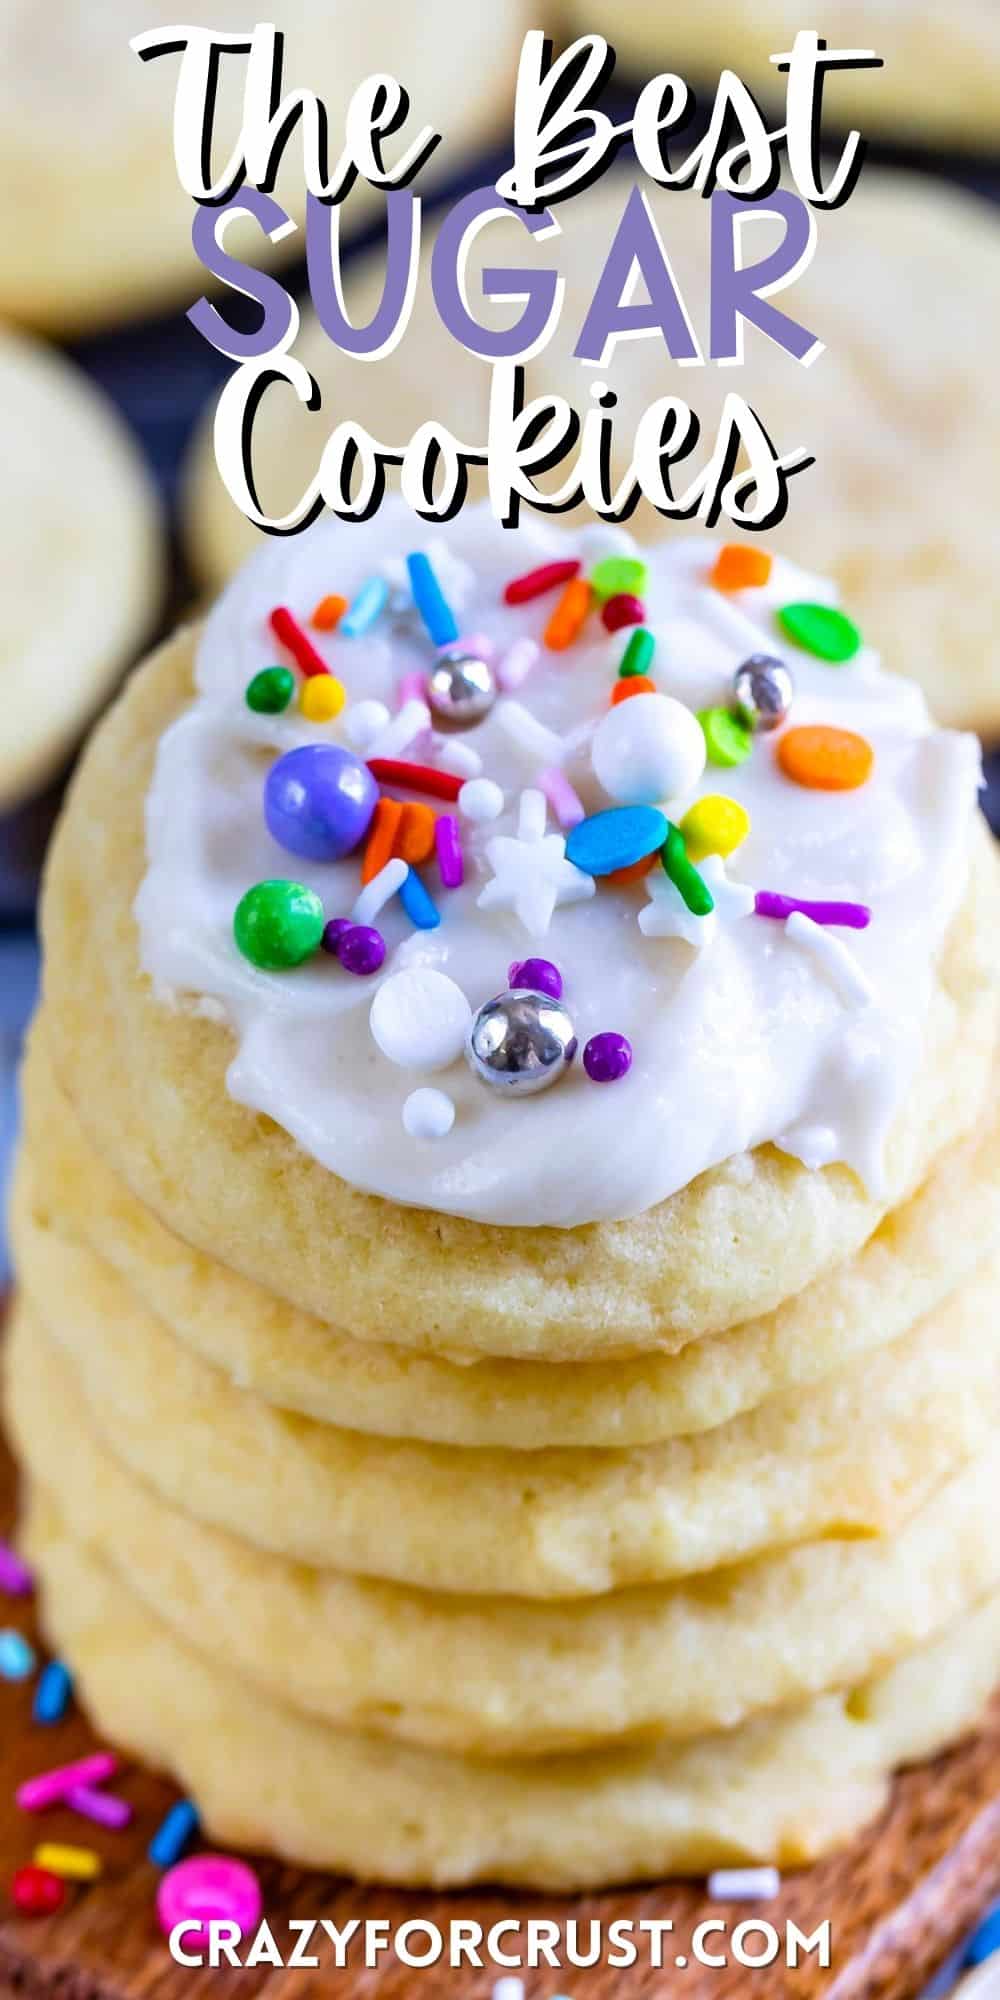 stacked sugar cookies with white icing and sprinkles on top with words on the image